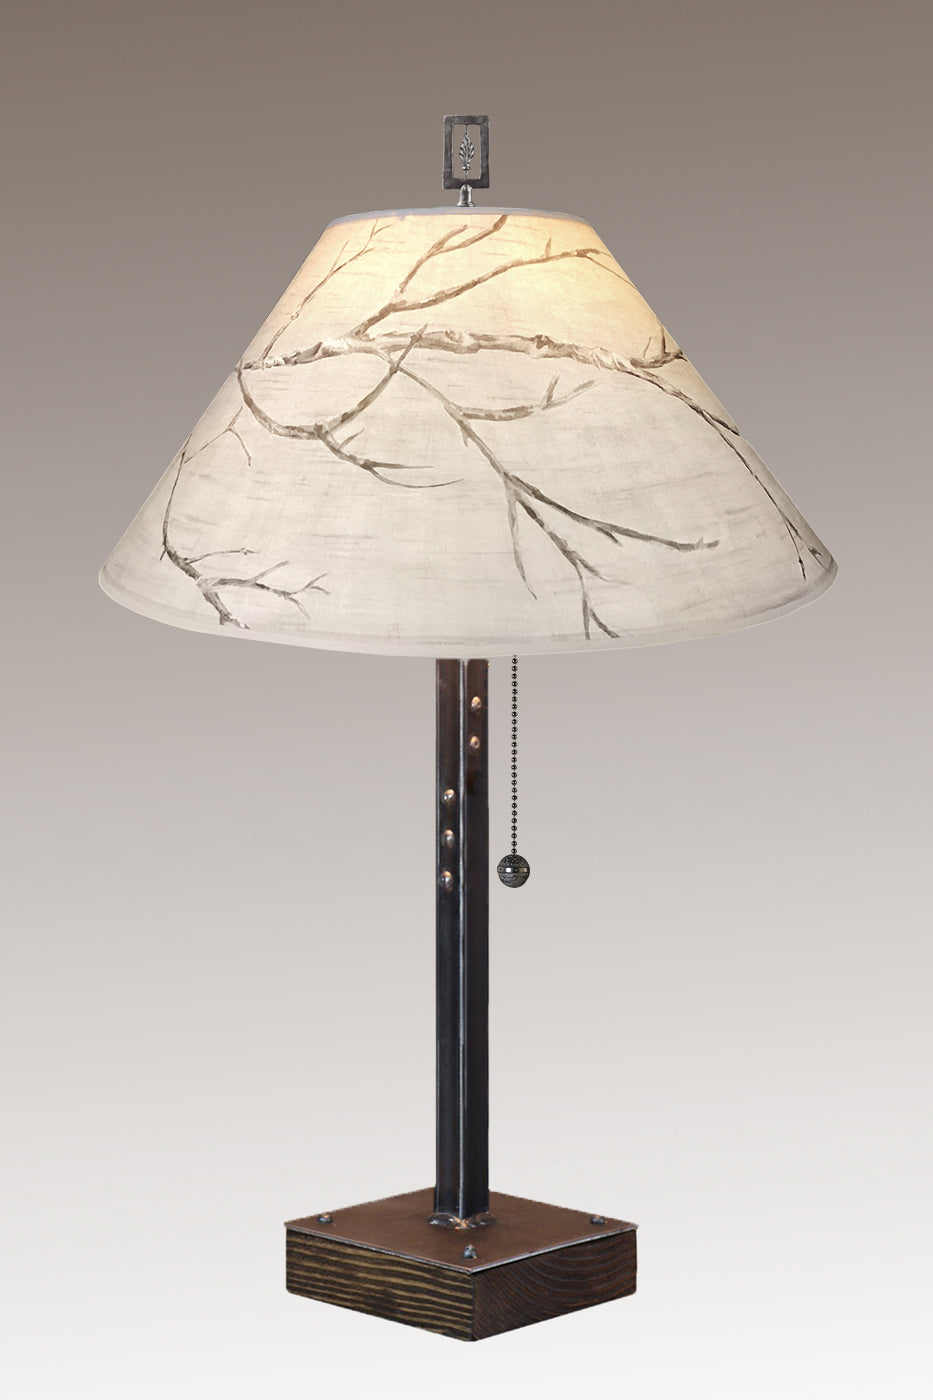 Steel Table Lamp on Wood with Large Conical Shade in Sweeping Branch